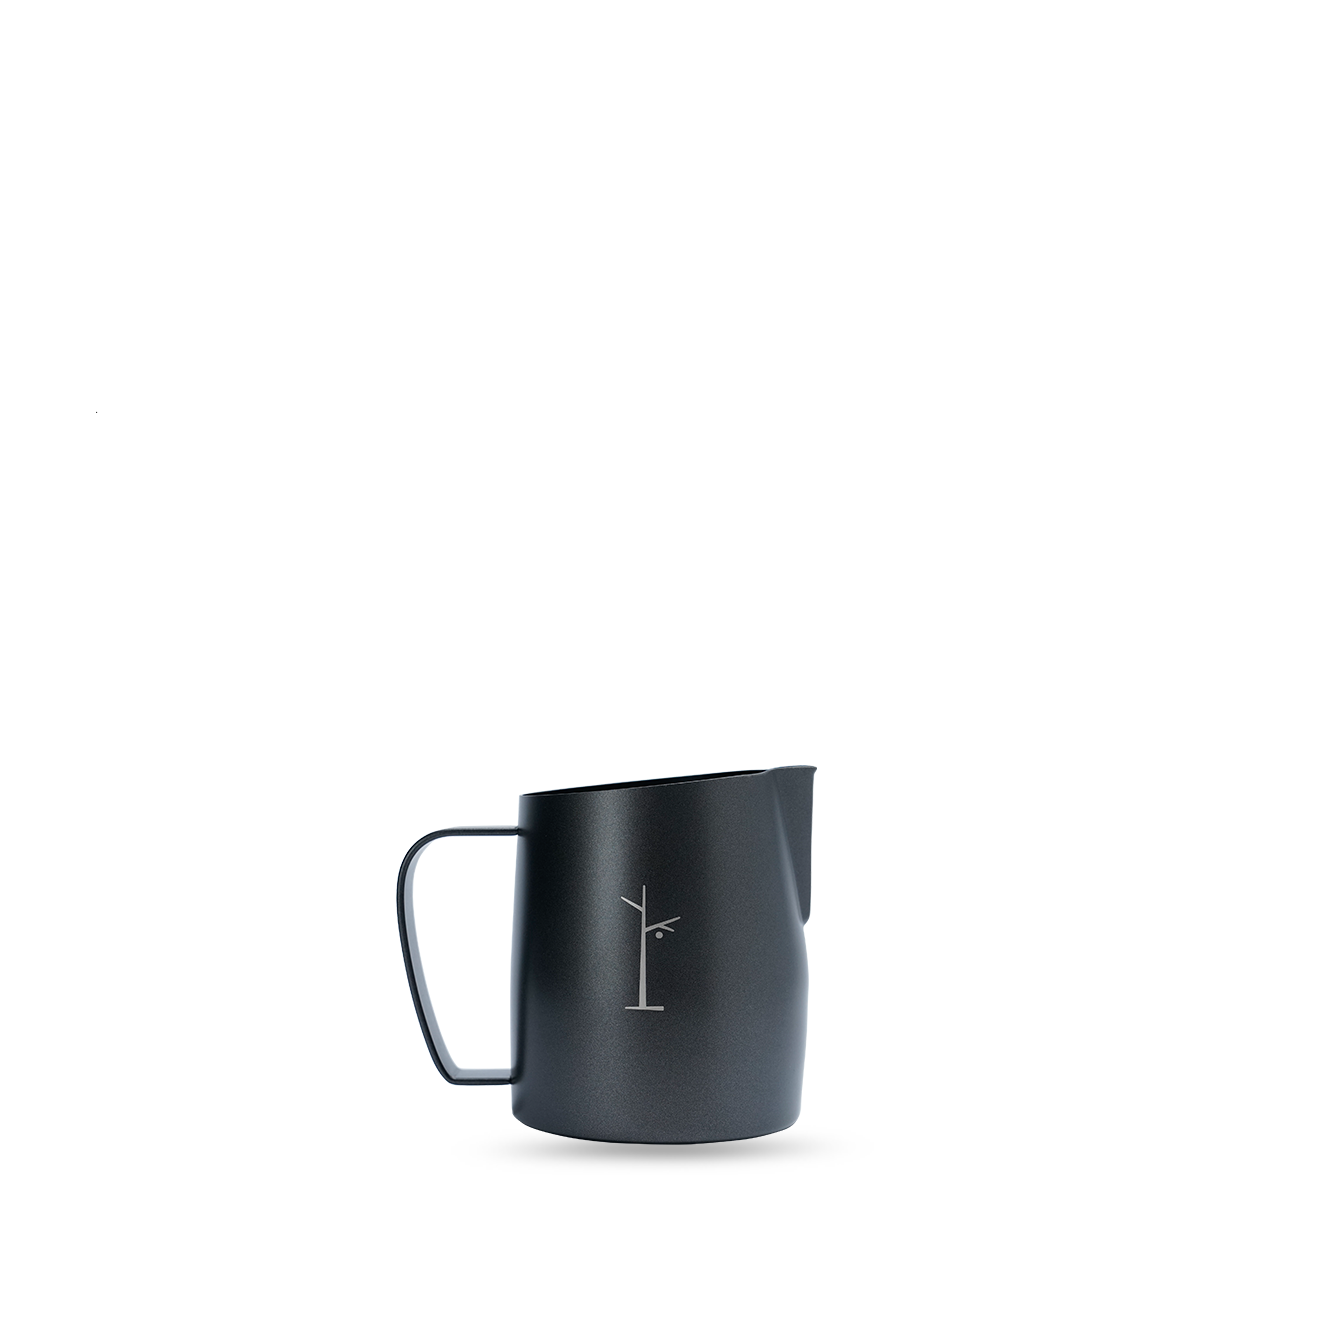 Earth Roastery | Tools | Pitcher - 450ml